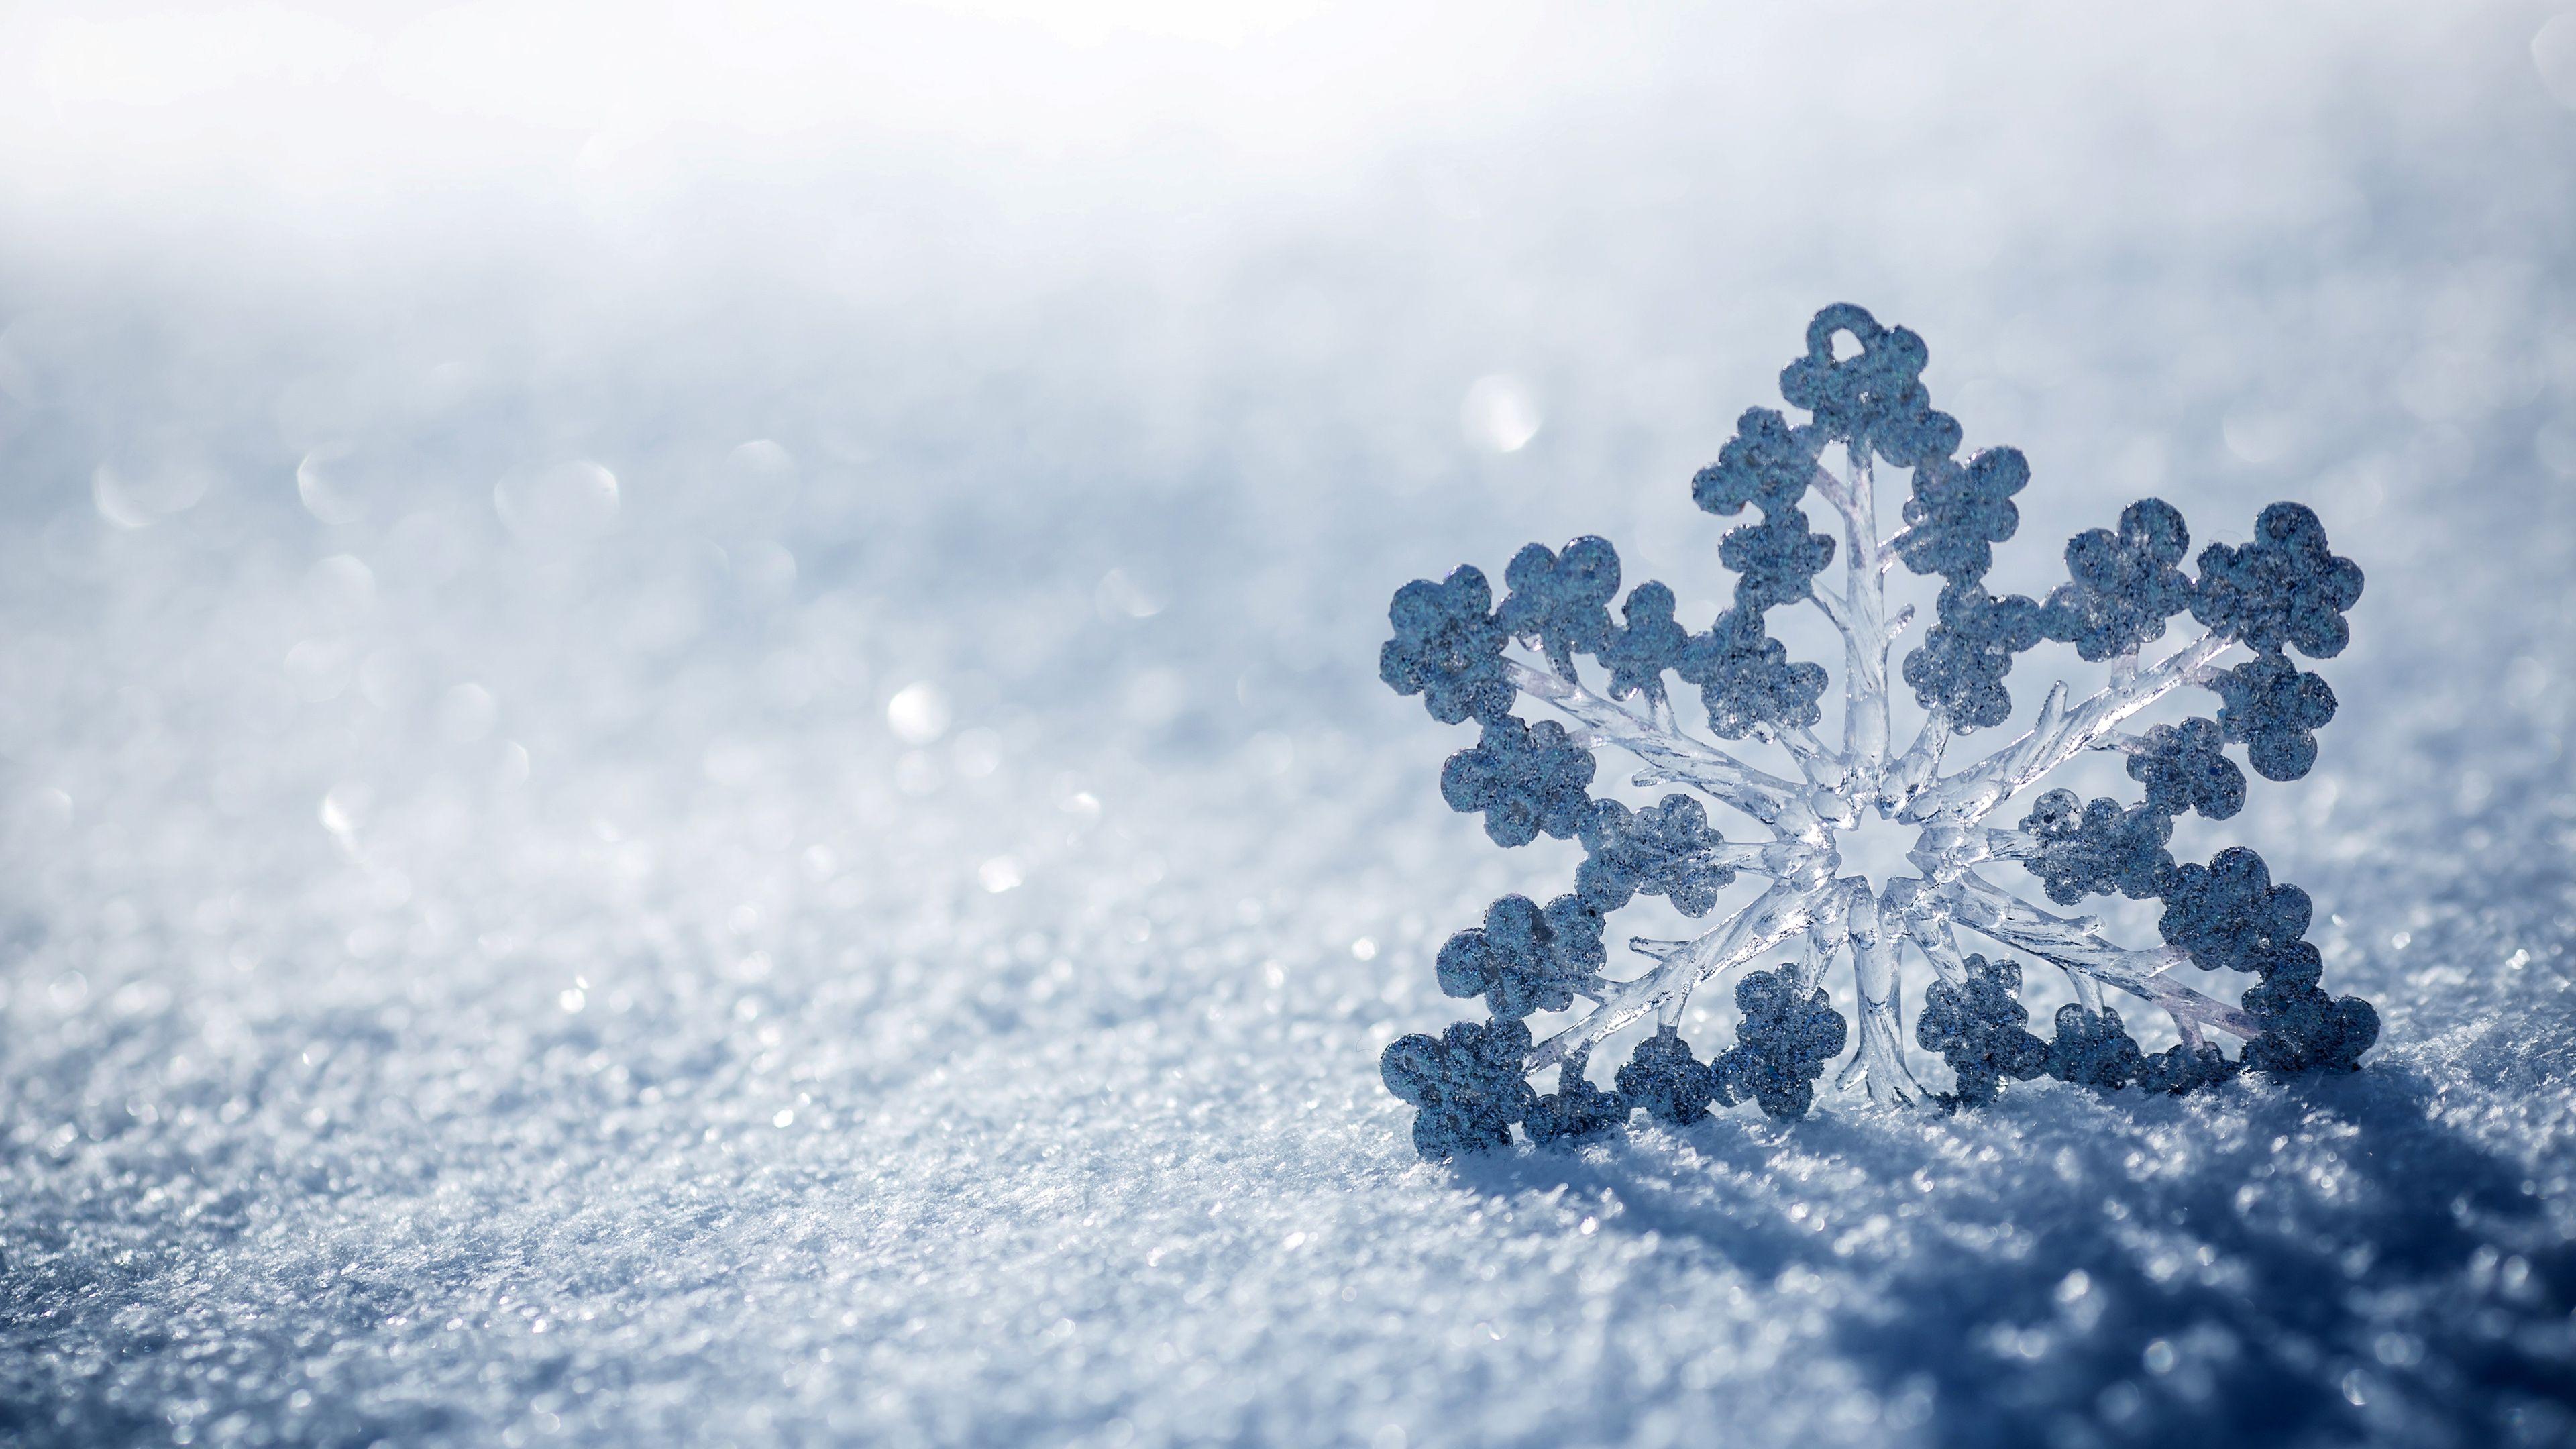 Ice Snowflake. Falling SNOW:Water Cycle. Wallpaper